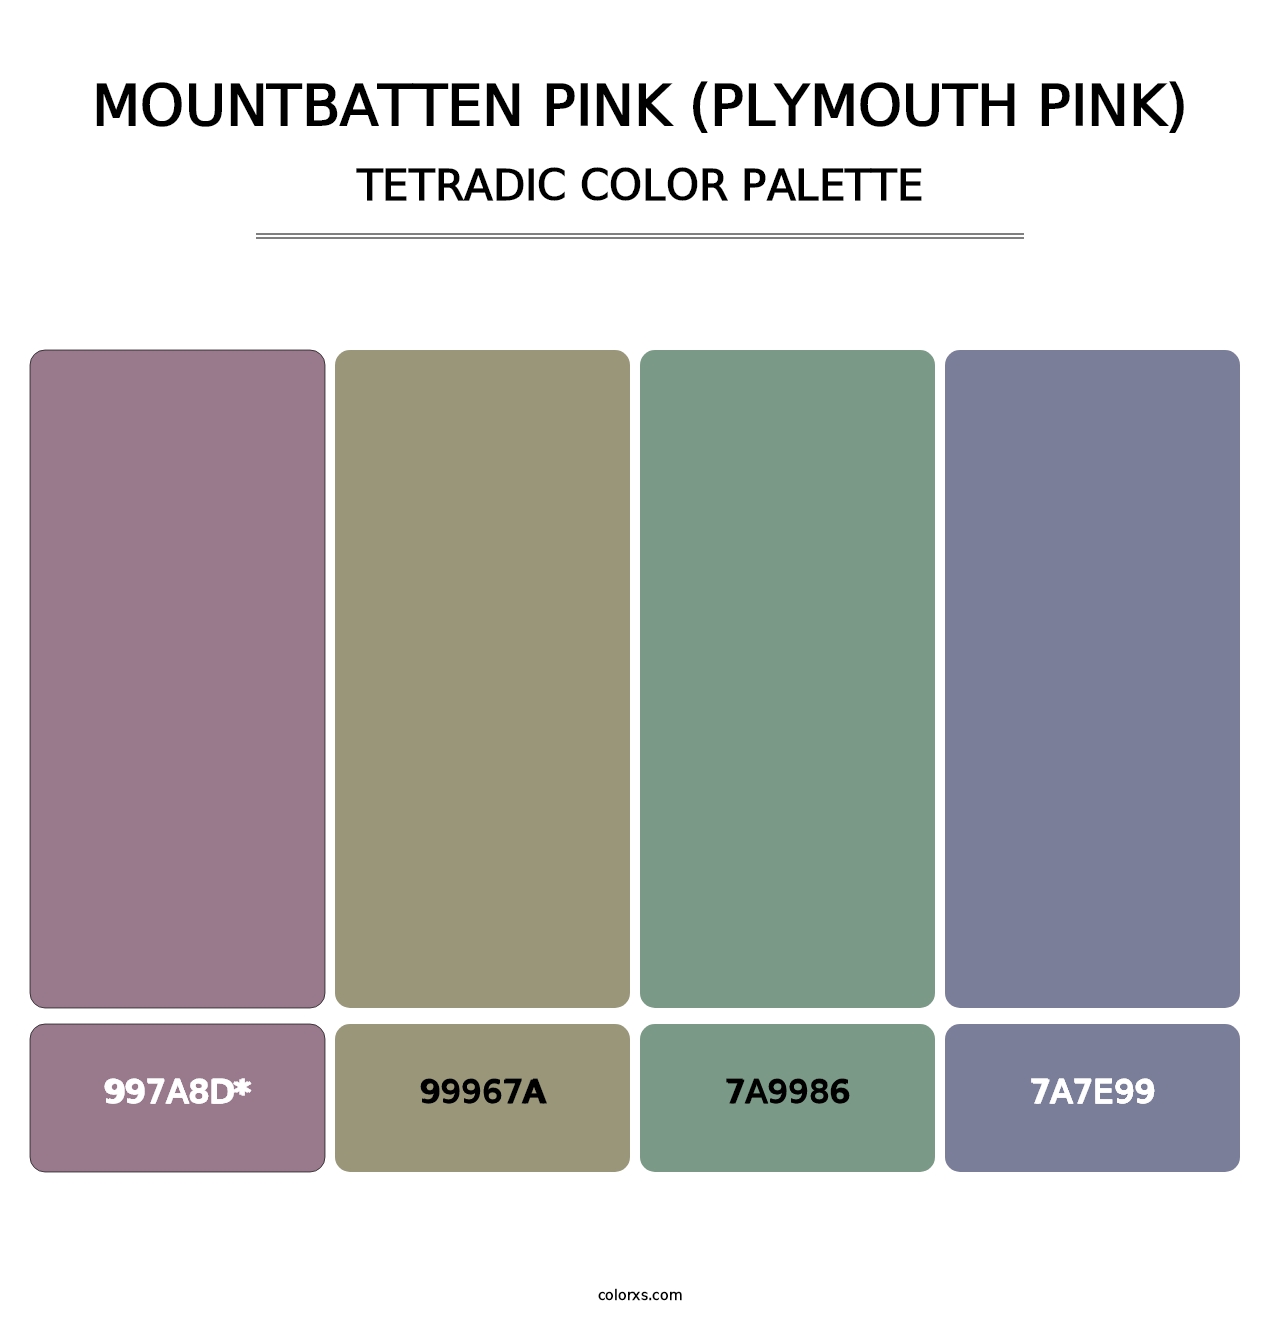 Mountbatten Pink (Plymouth Pink) - Tetradic Color Palette